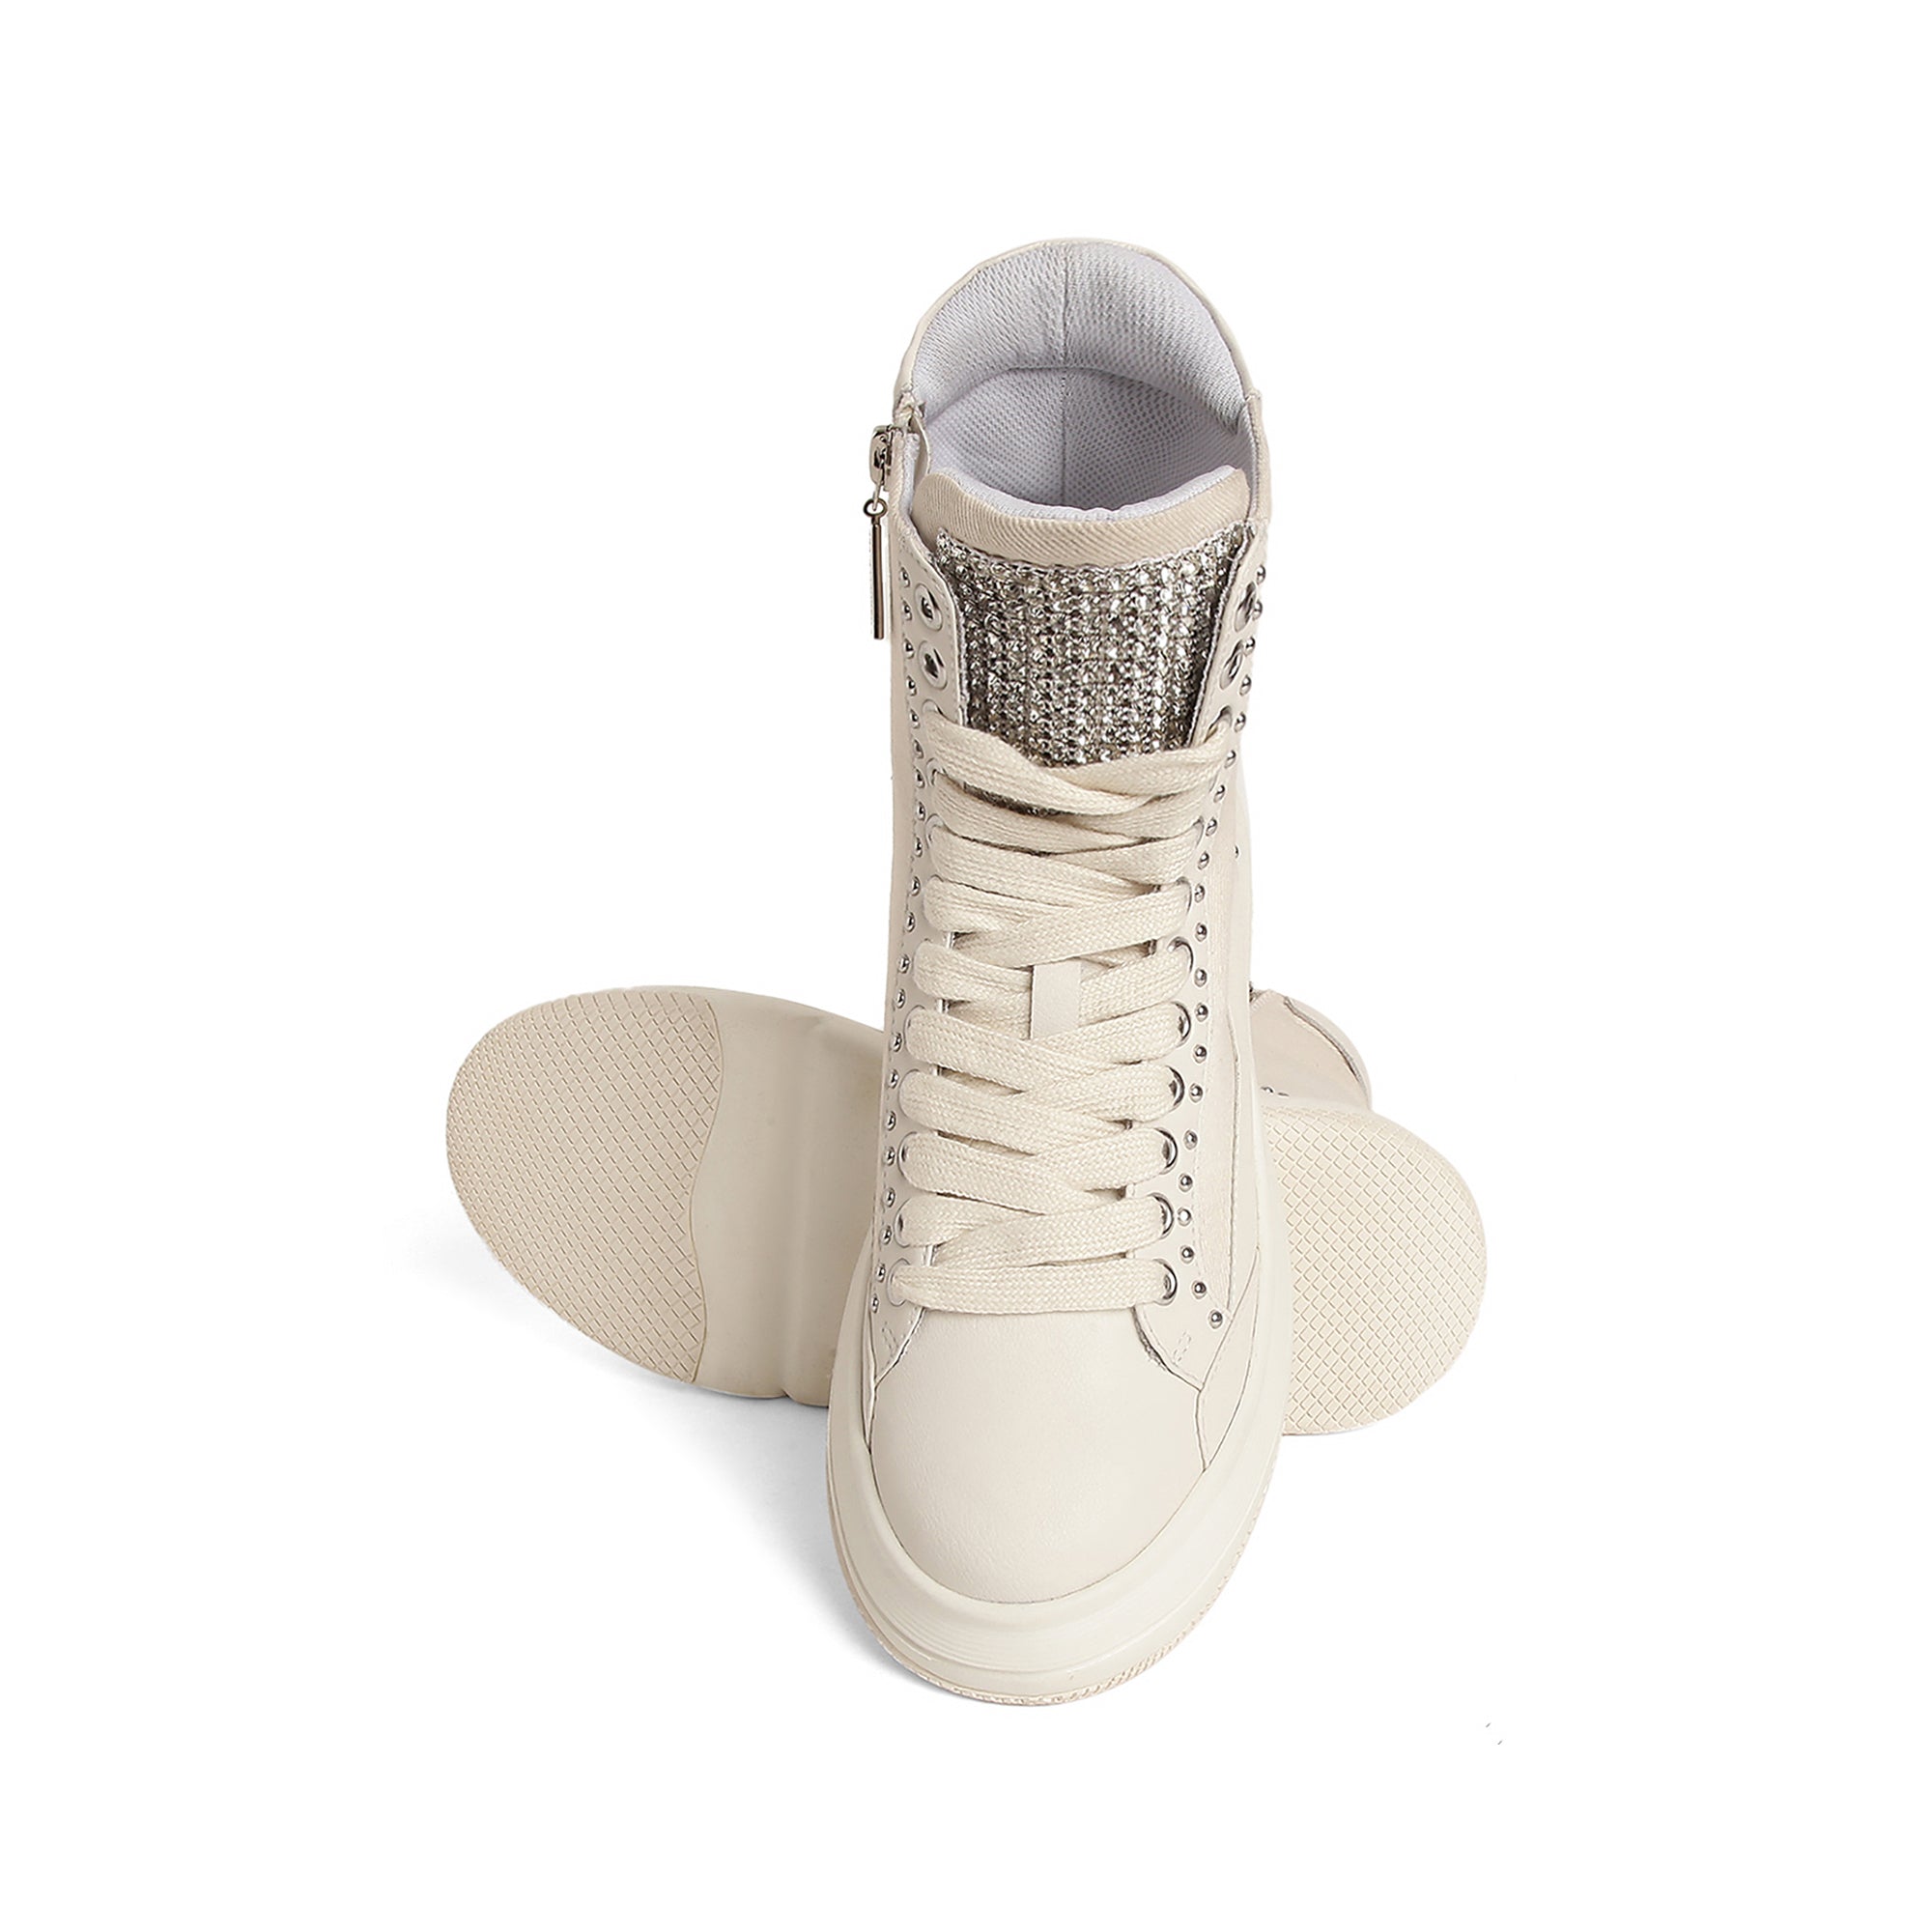 ZINA PERFORATED SNEAKERS WHITE PERFORATED LEATHER – Dolce Vita